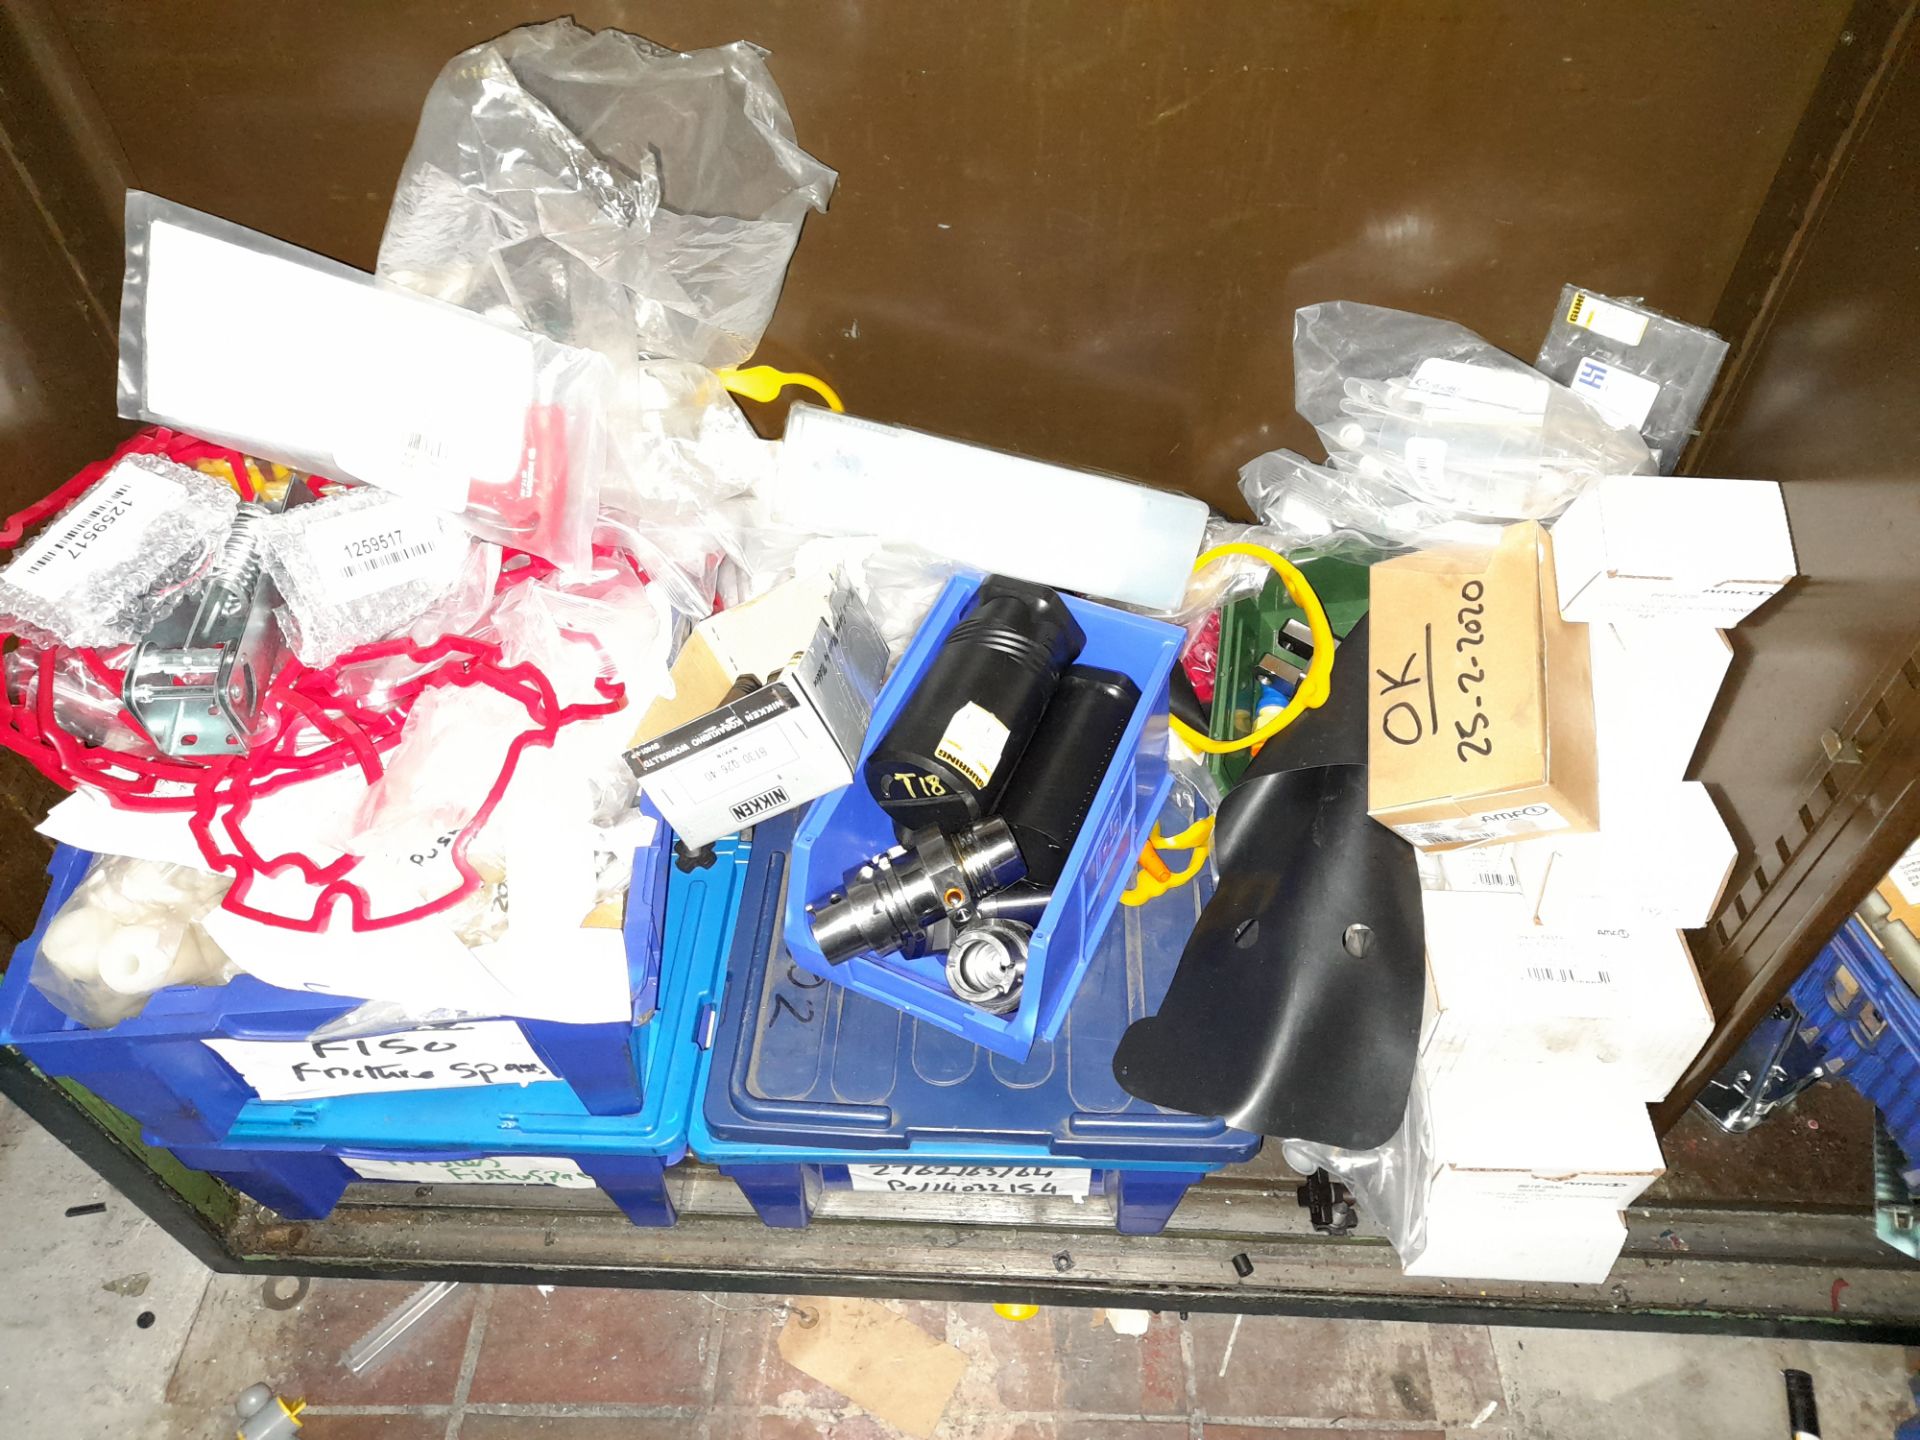 Contents to storage unit, to include CNC machine toolholders, component parts, gaskets, valves, fans - Image 2 of 5